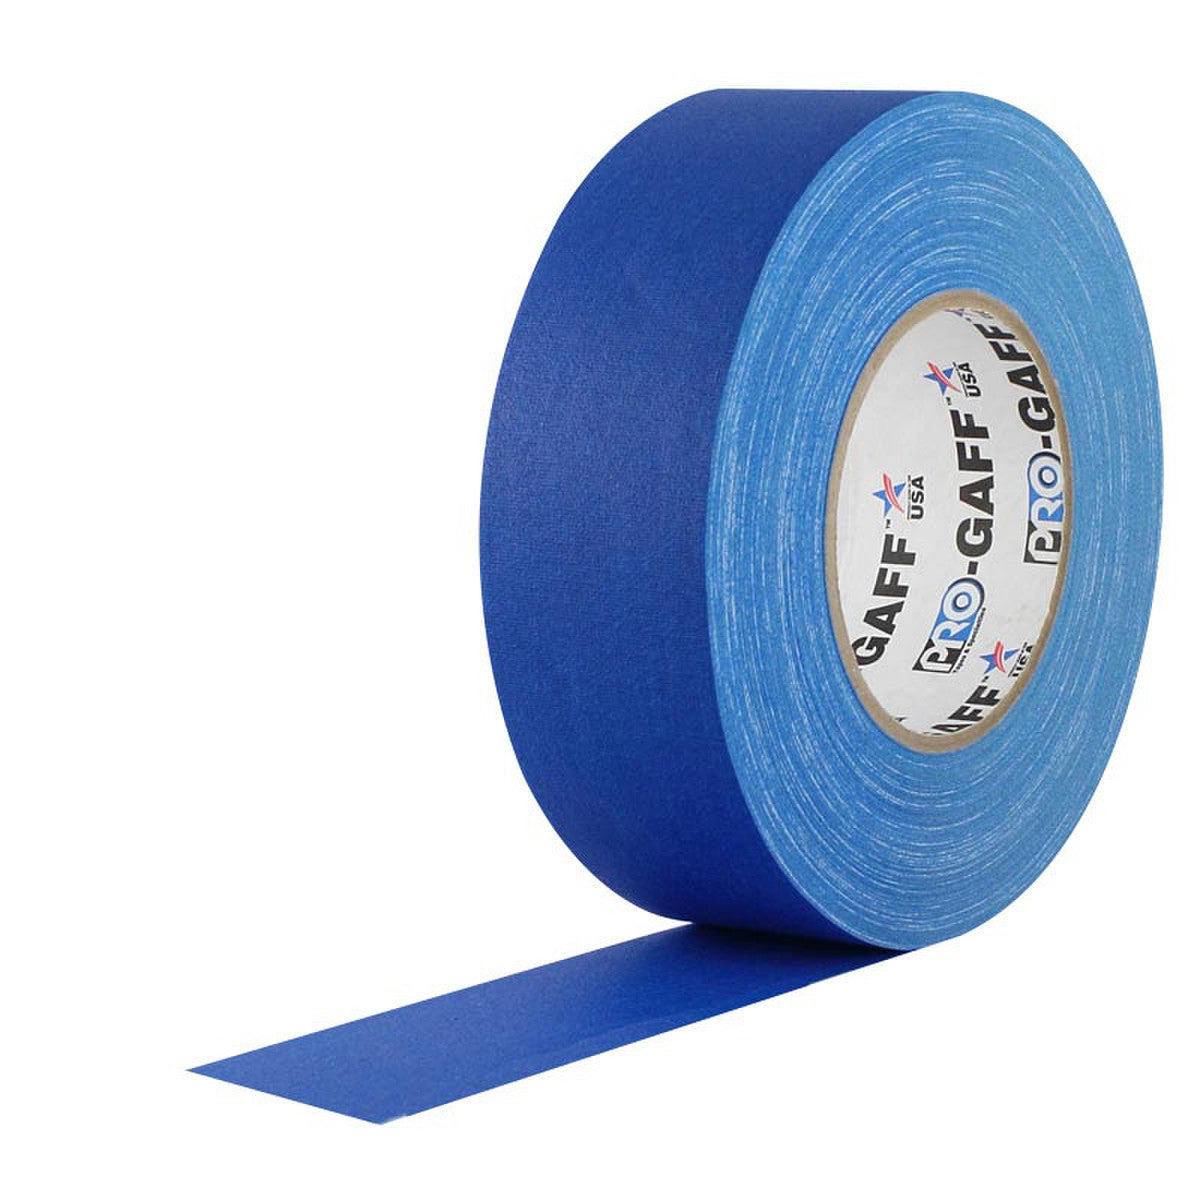 Pro Gaff Tape Cloth - Electric Blue - 55 Yards - 1"